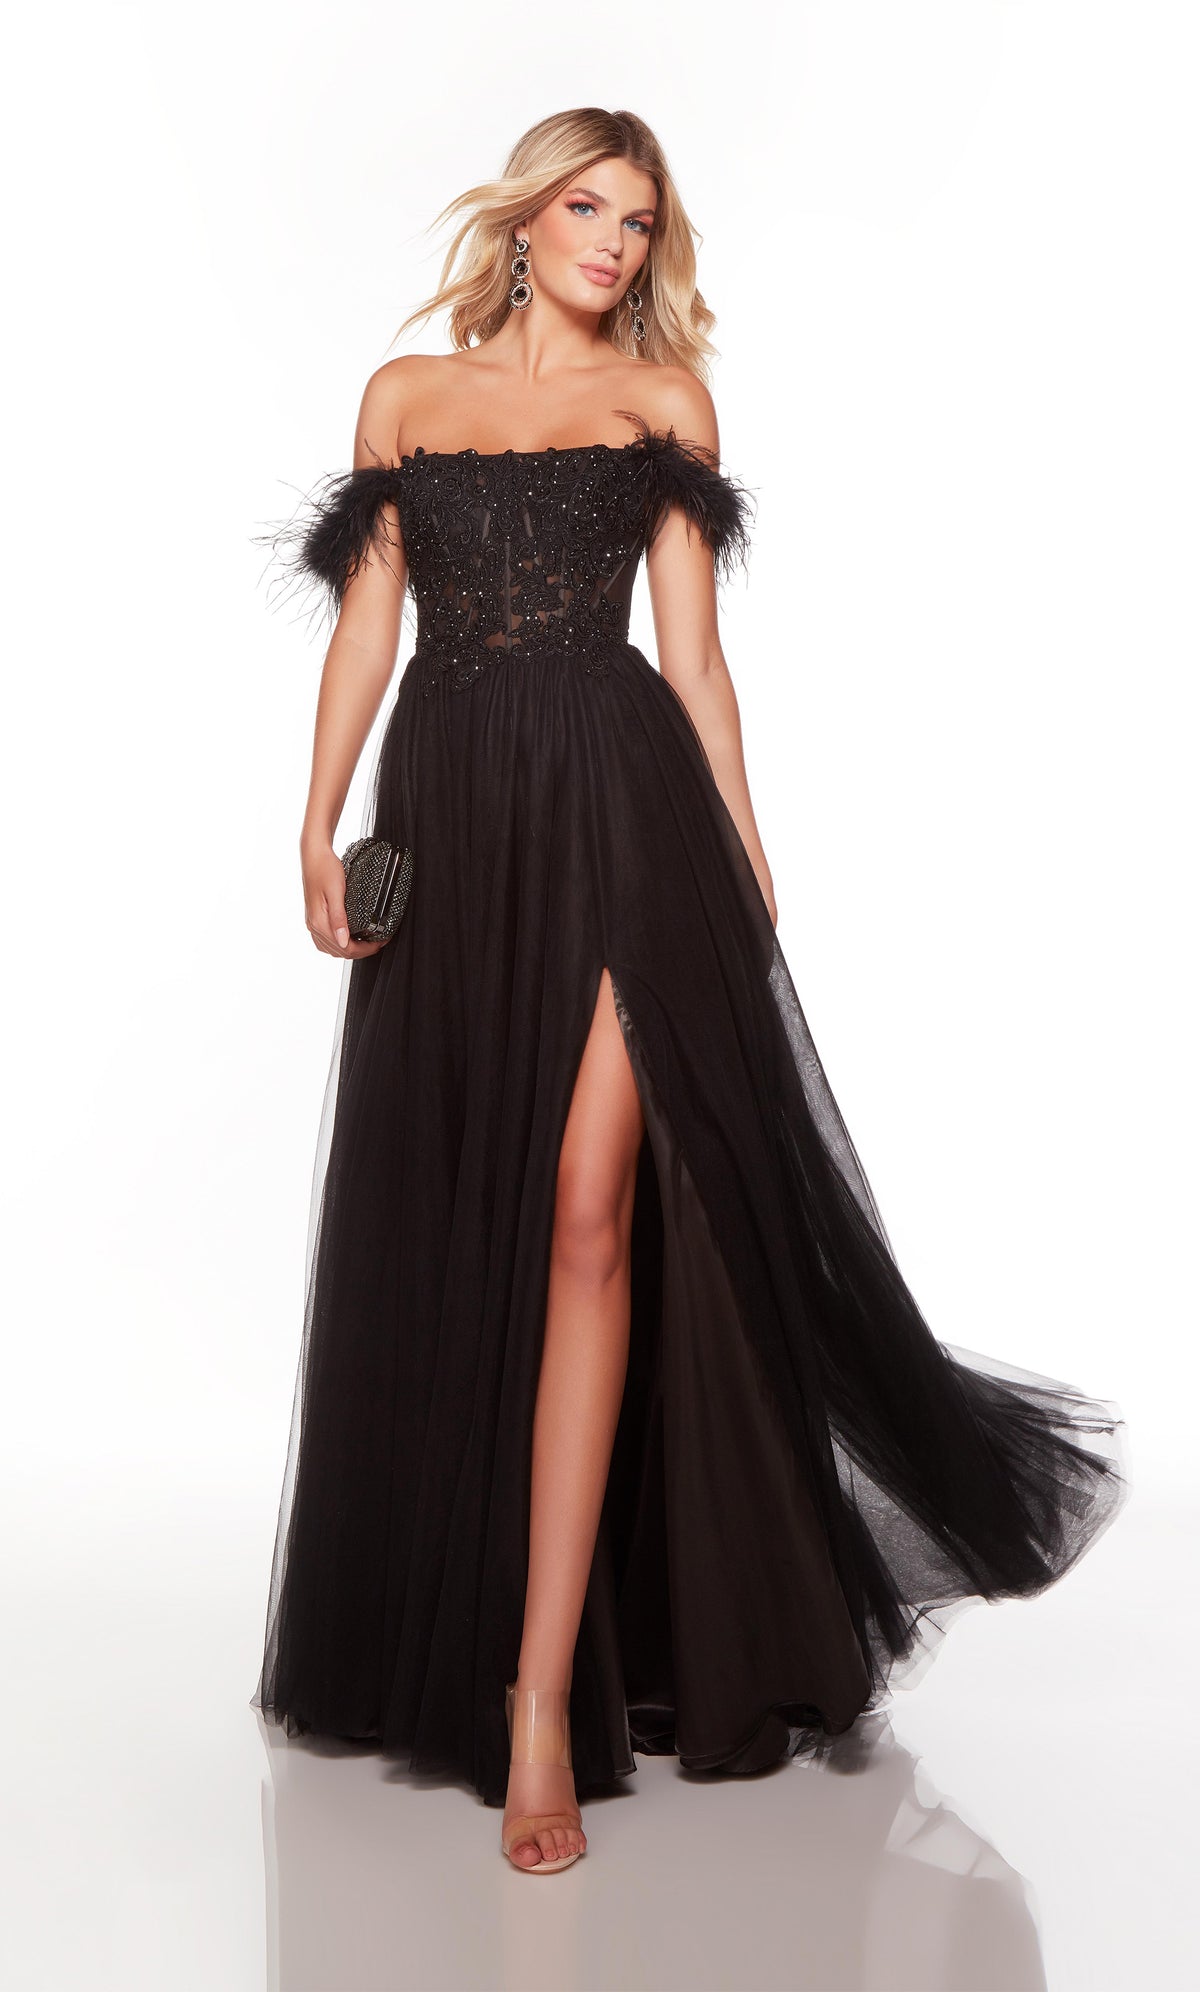 Off the shoulder black corset dress with feather accents, and a sheer lace bodice with a zip up back.